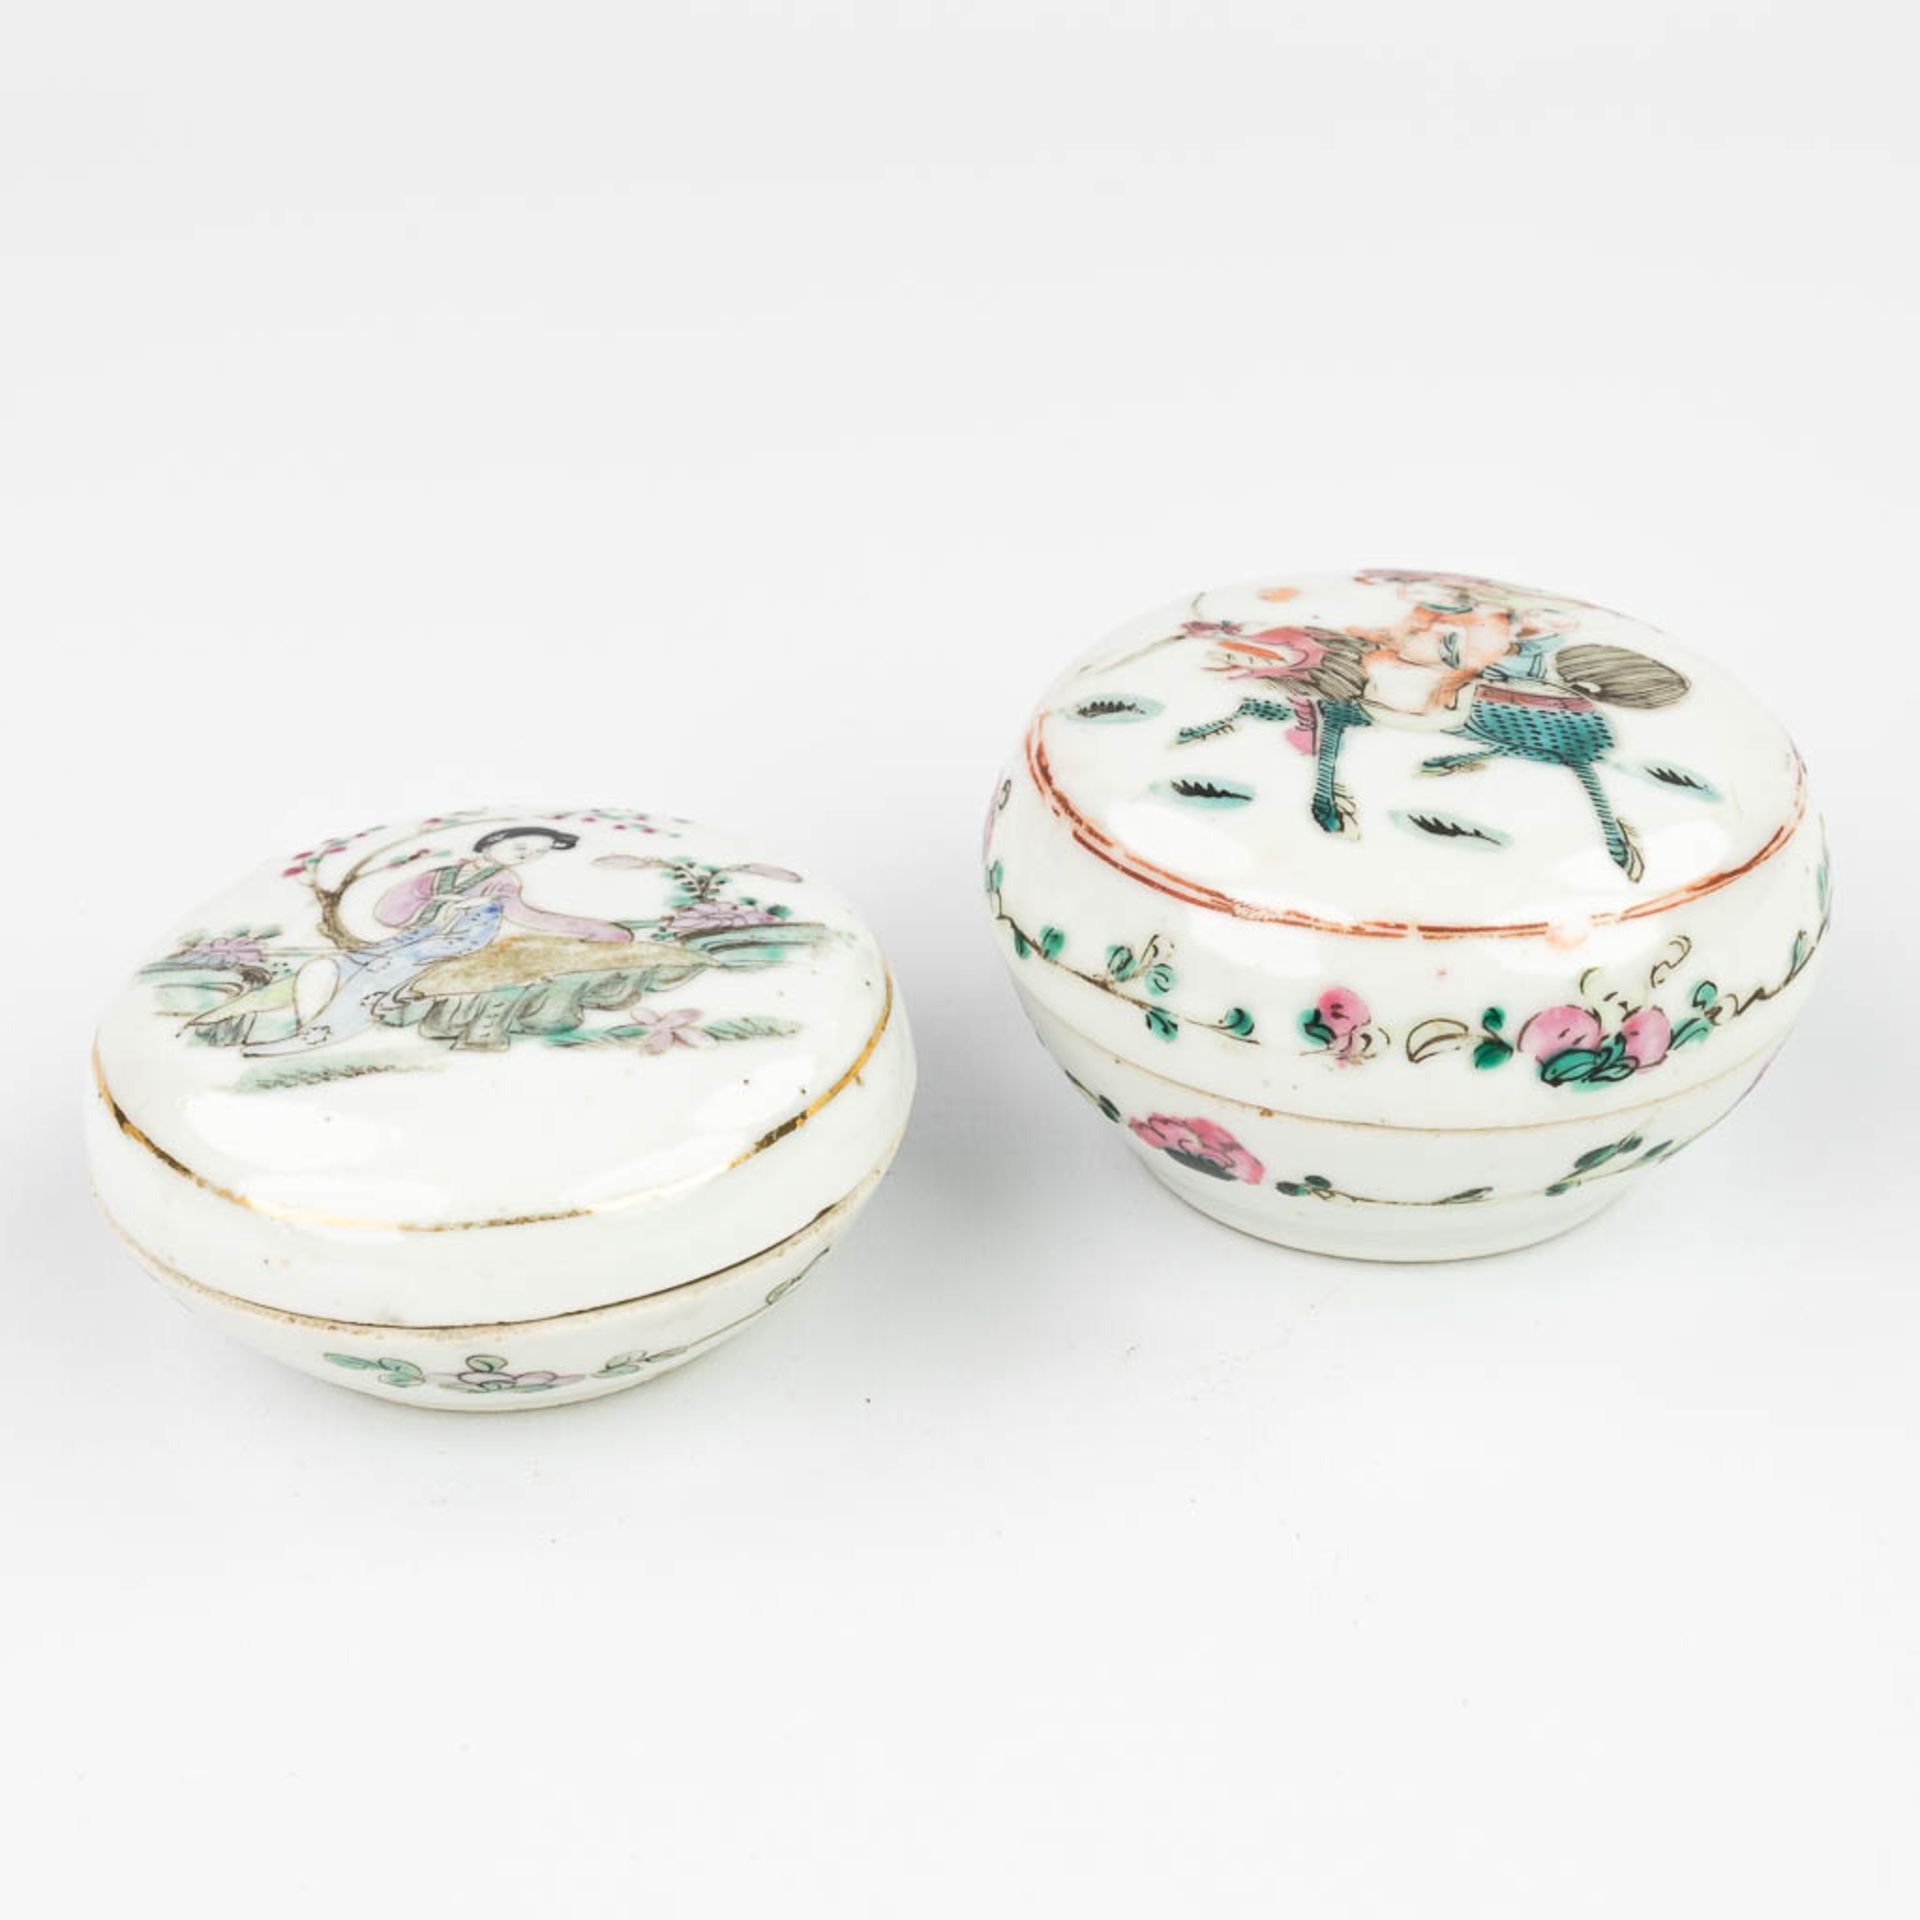 AÊset of 2 Chinese pots with lid, with hand-painted decor and made of porcelain (5 x 8,5 cm)